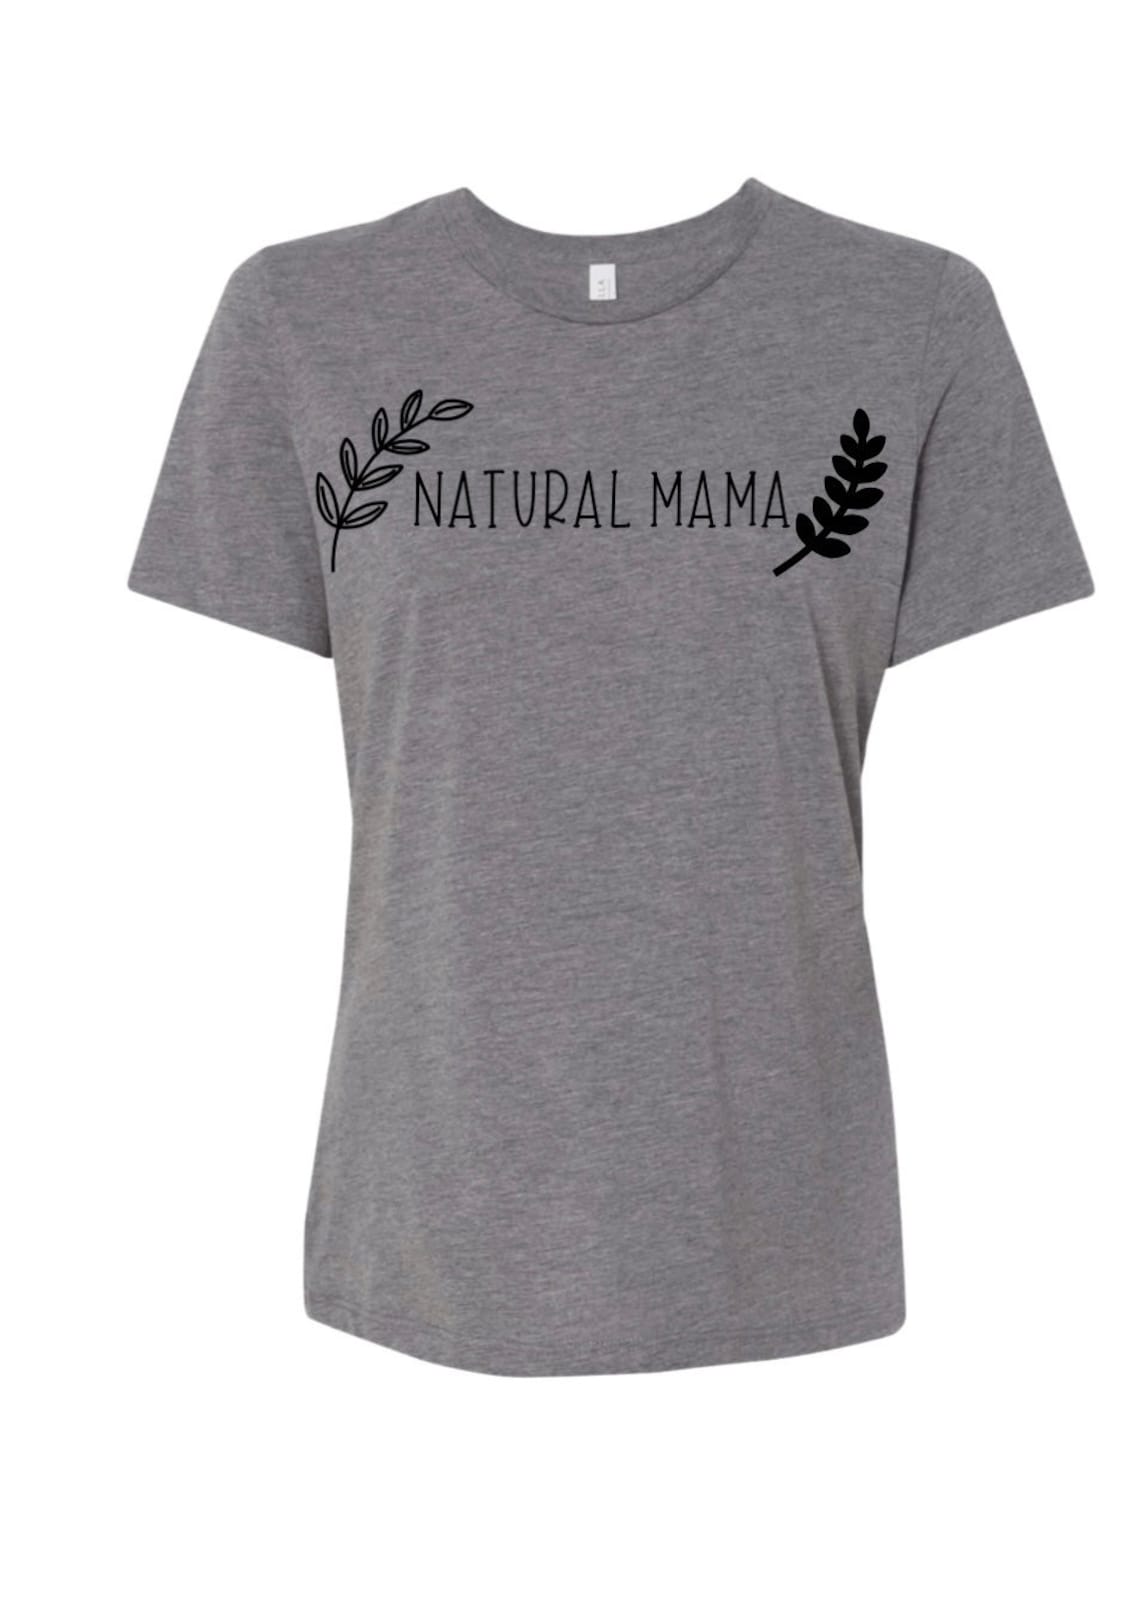 All Natural Mom Graphic Tee | Etsy